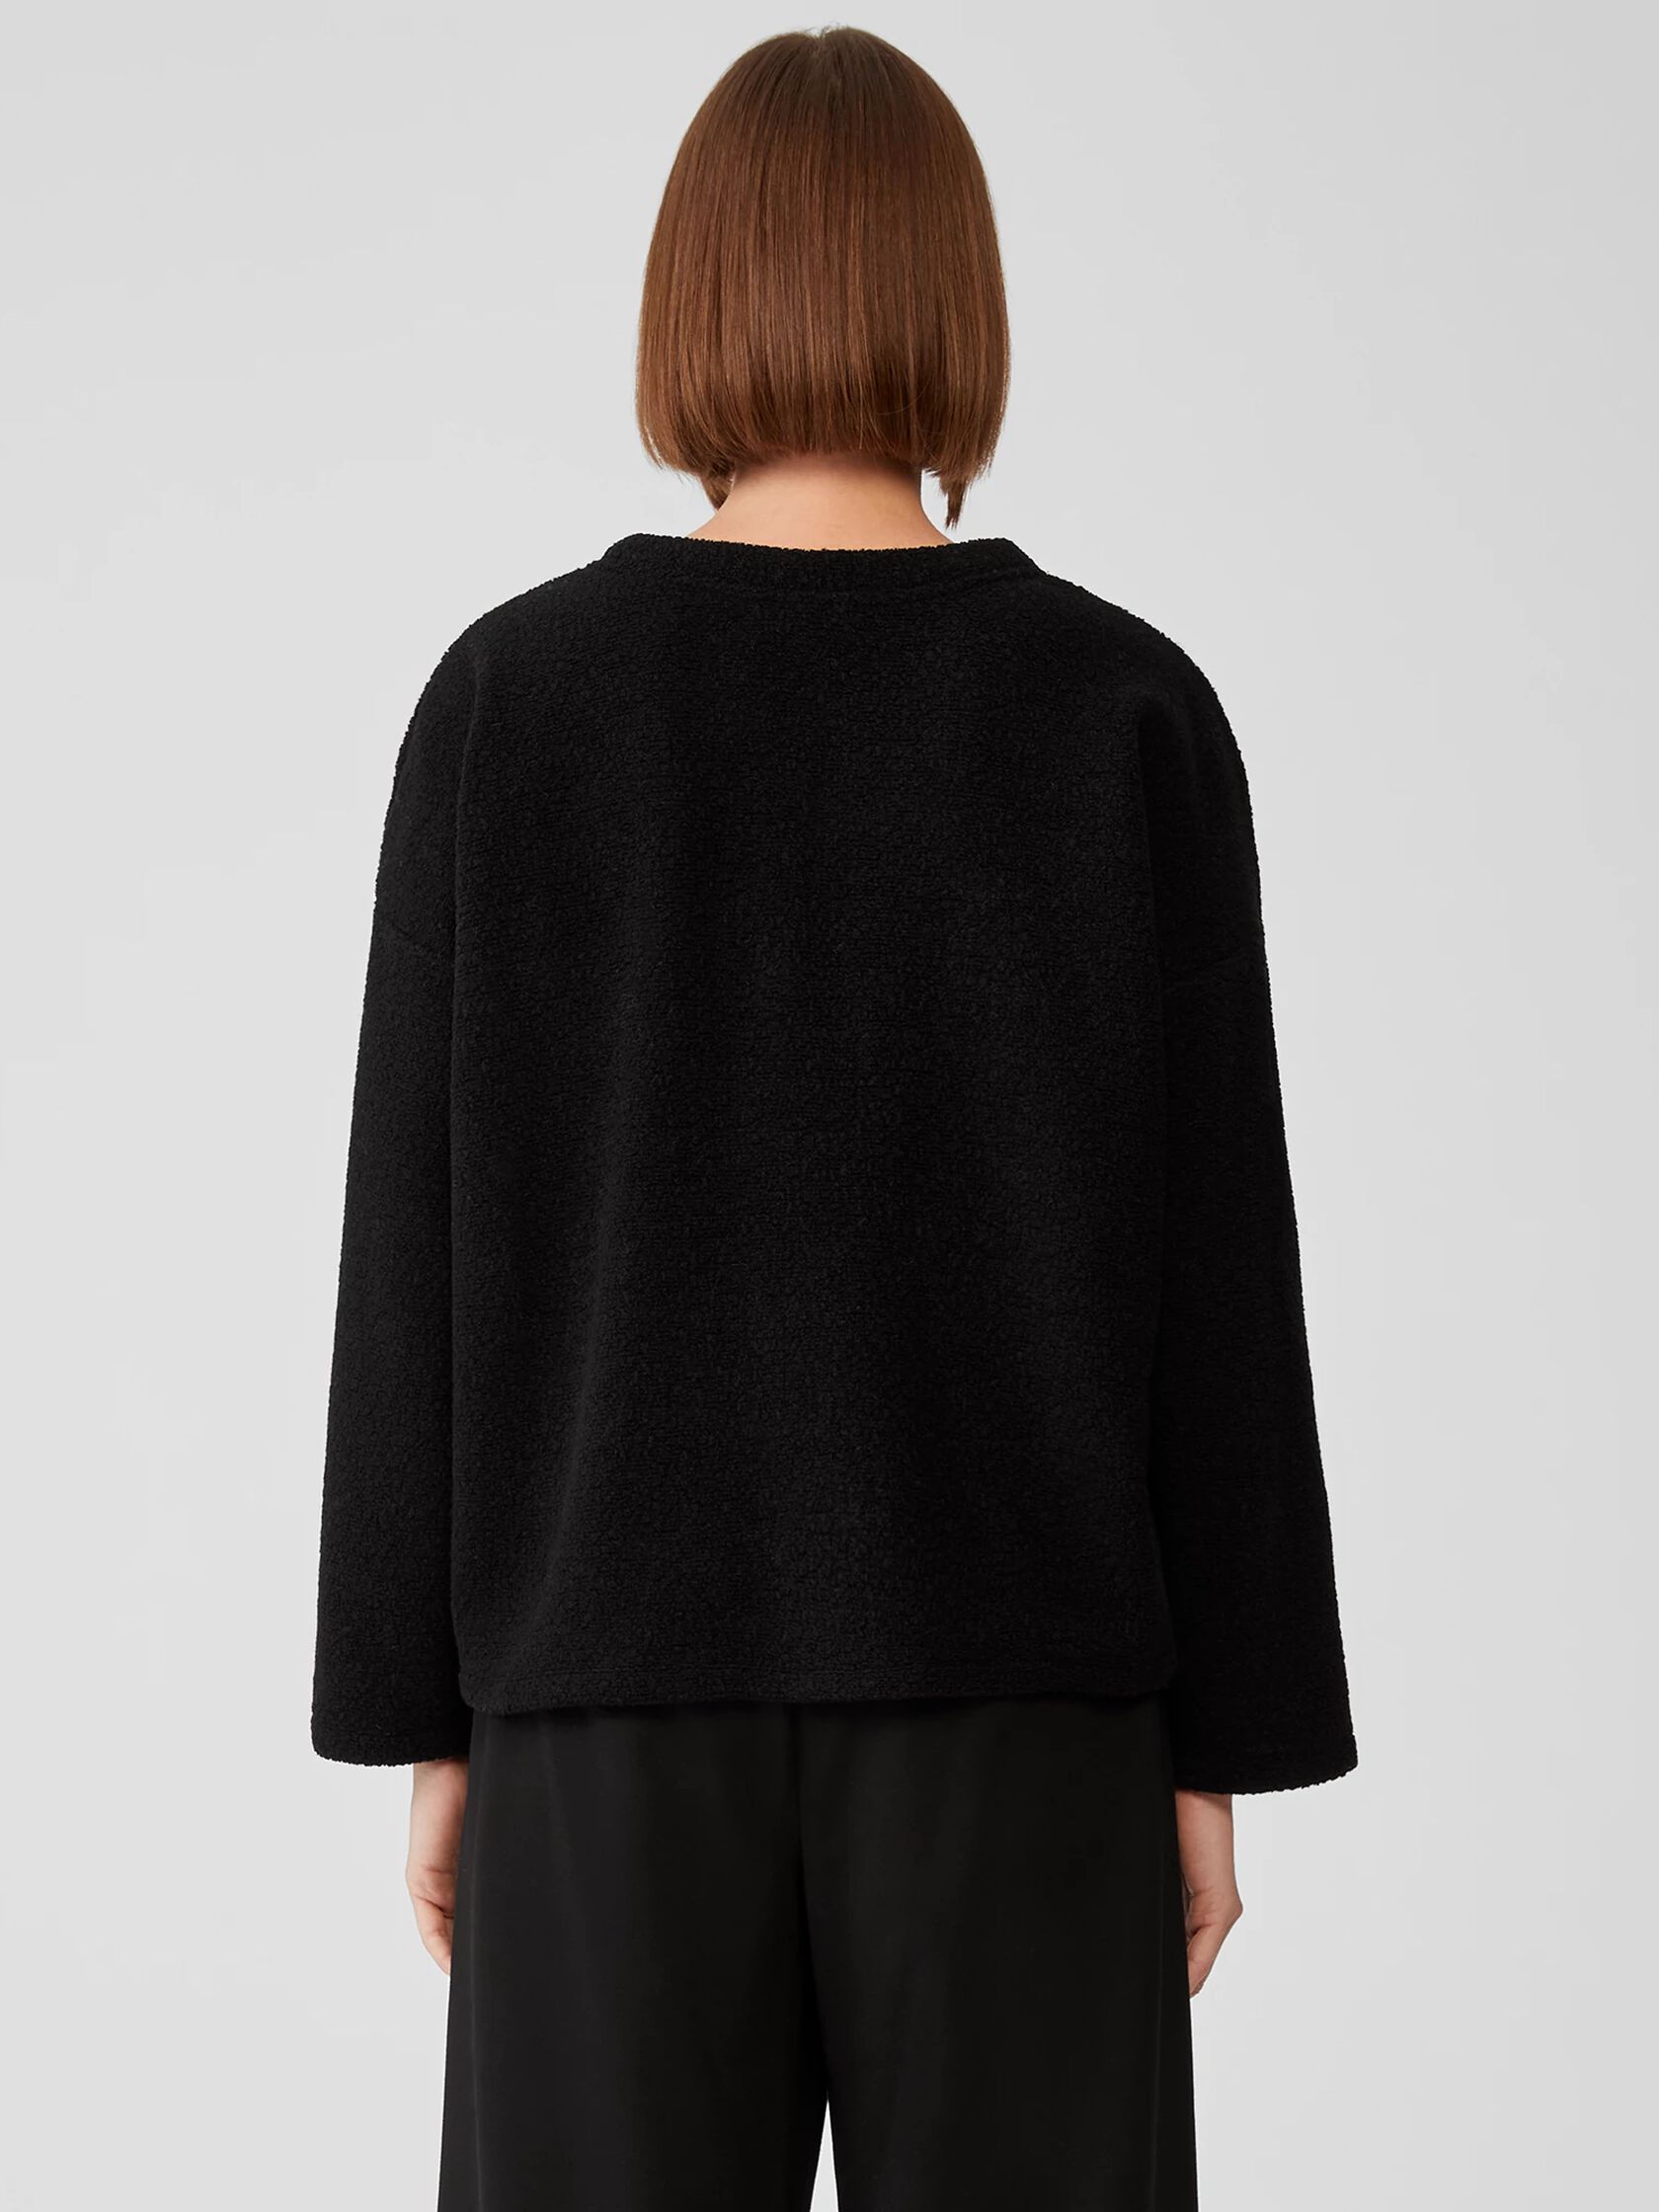 Boucle Wool Knit Crew Neck Box-Top | EILEEN FISHER